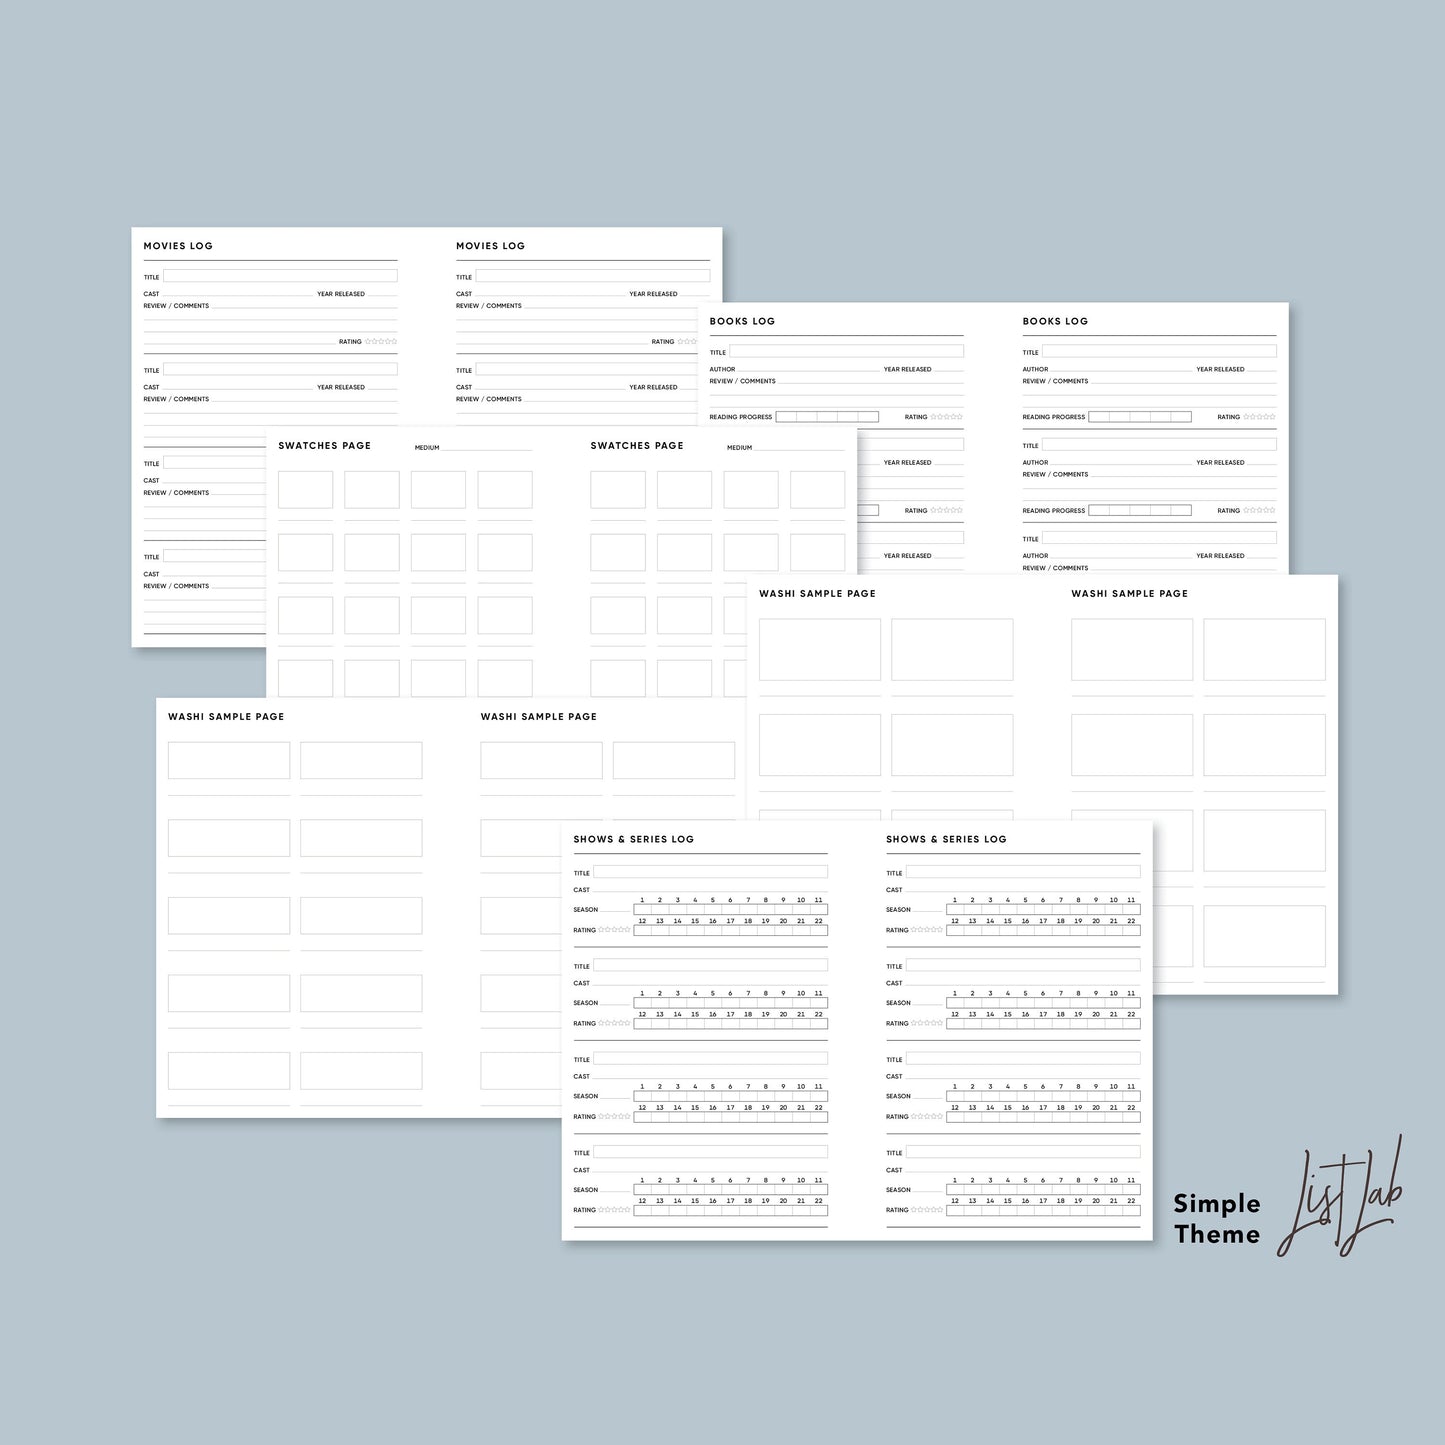 Personal Wide Ring ME TIME KIT Printable Insert Set